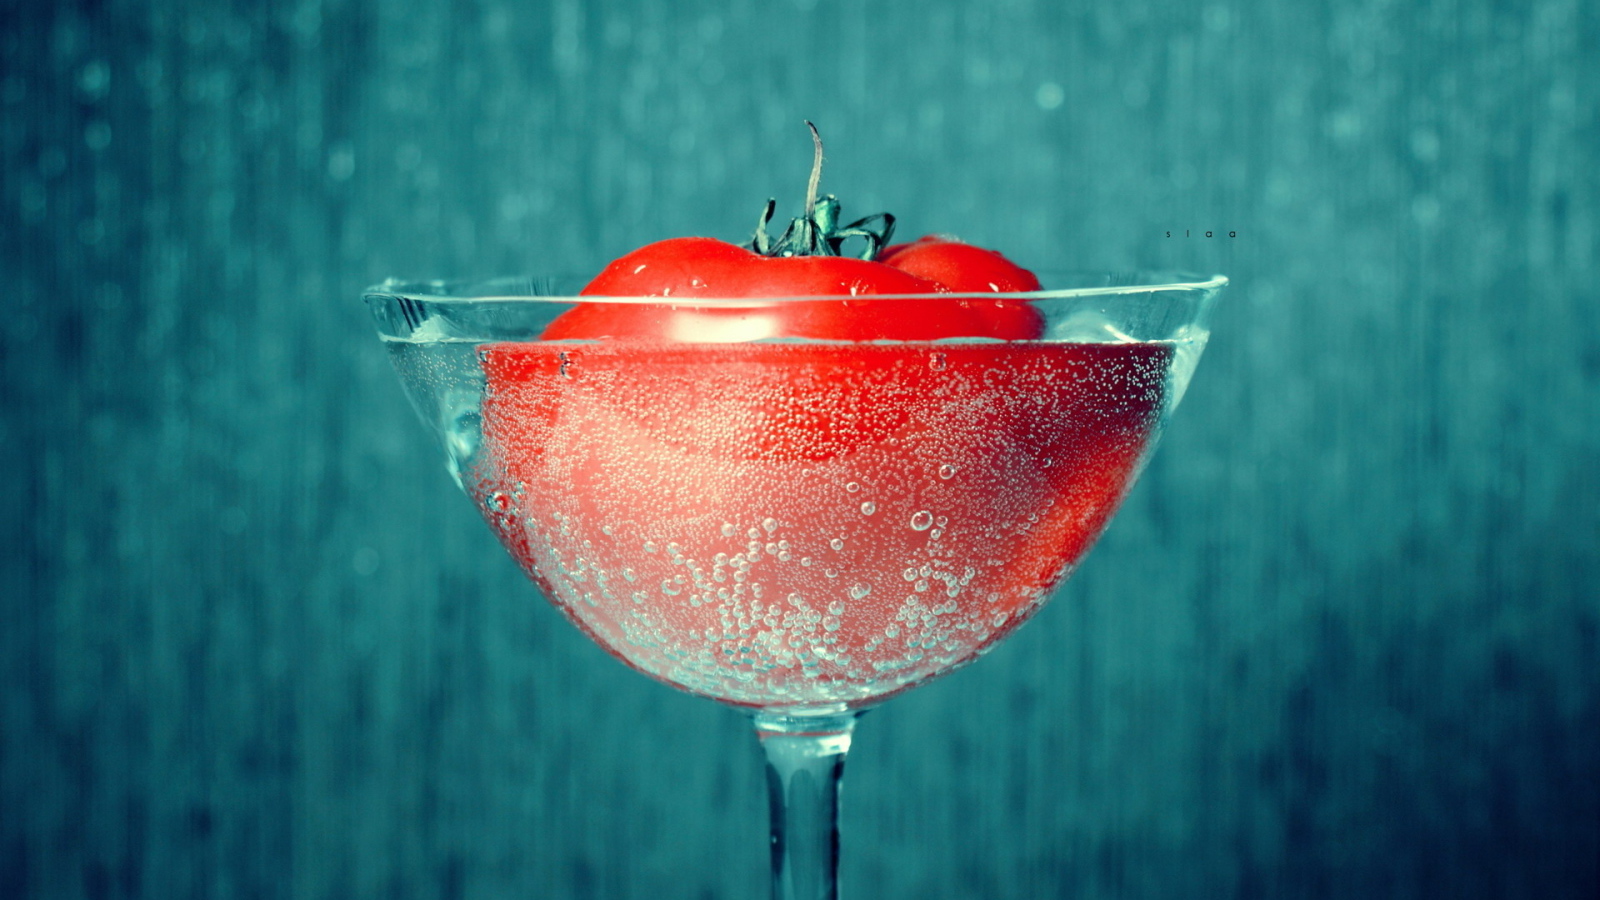 Tomatoes in a glass